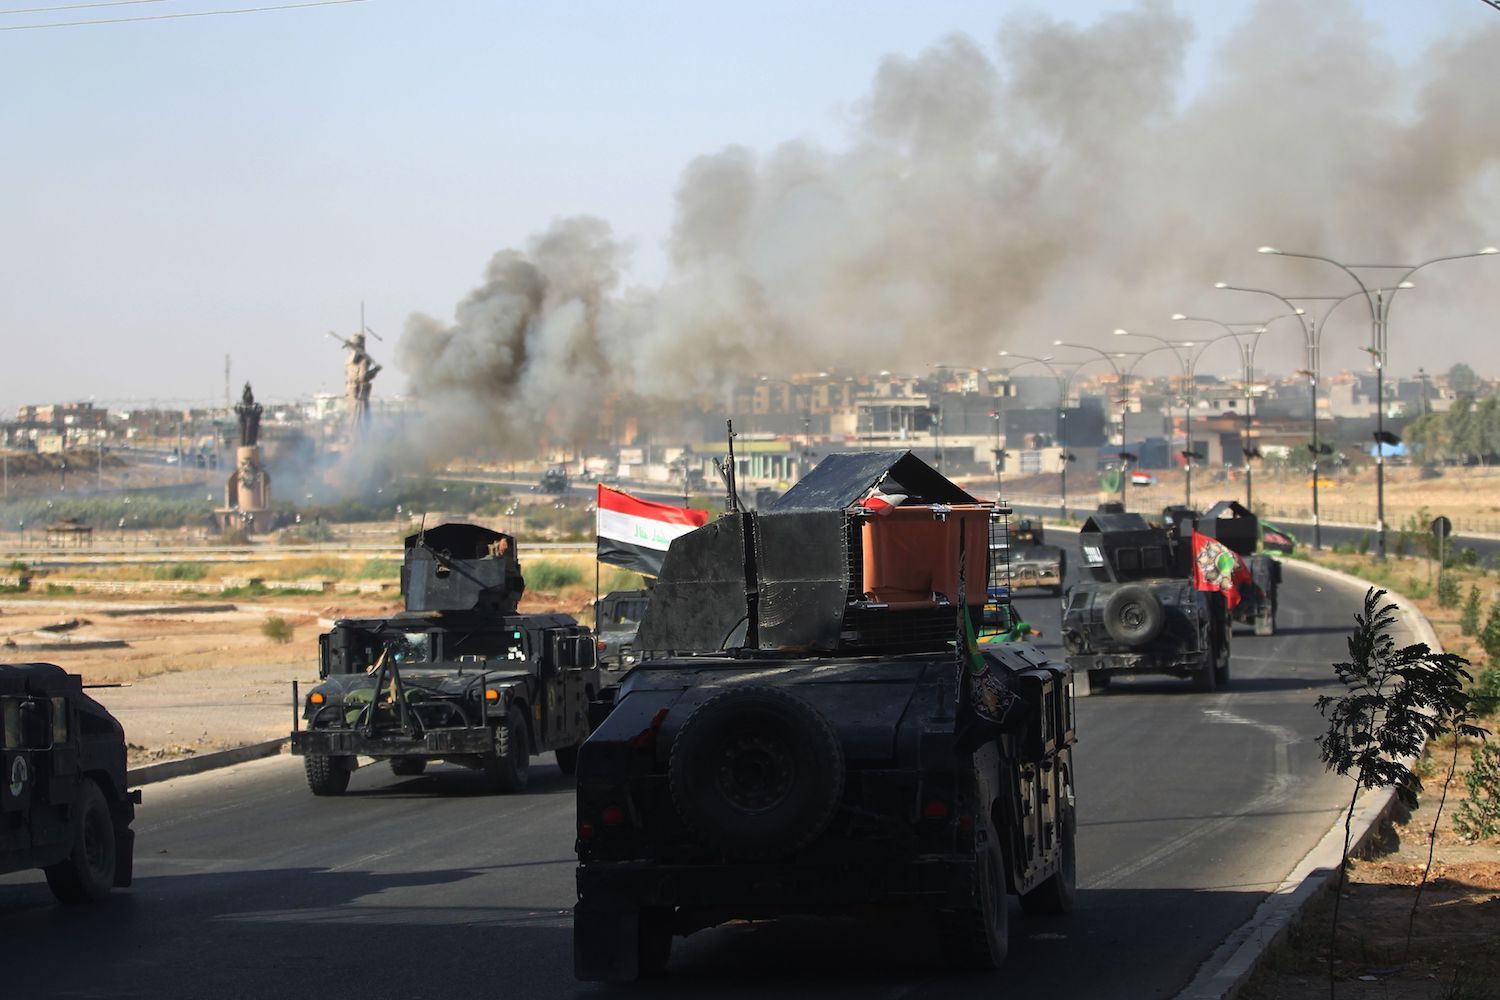 Smoke billows as Iraqi forces advance towards the centre of Kirkuk during an operation against Kurdish fighters on October 16, 2017.  Iraqi forces seized the Kirkuk governor's office, key military sites and an oil field as they swept across the disputed province following soaring tensions over an independence referendum. / AFP PHOTO / AHMAD AL-RUBAYE        (Photo credit should read AHMAD AL-RUBAYE/AFP/Getty Images)